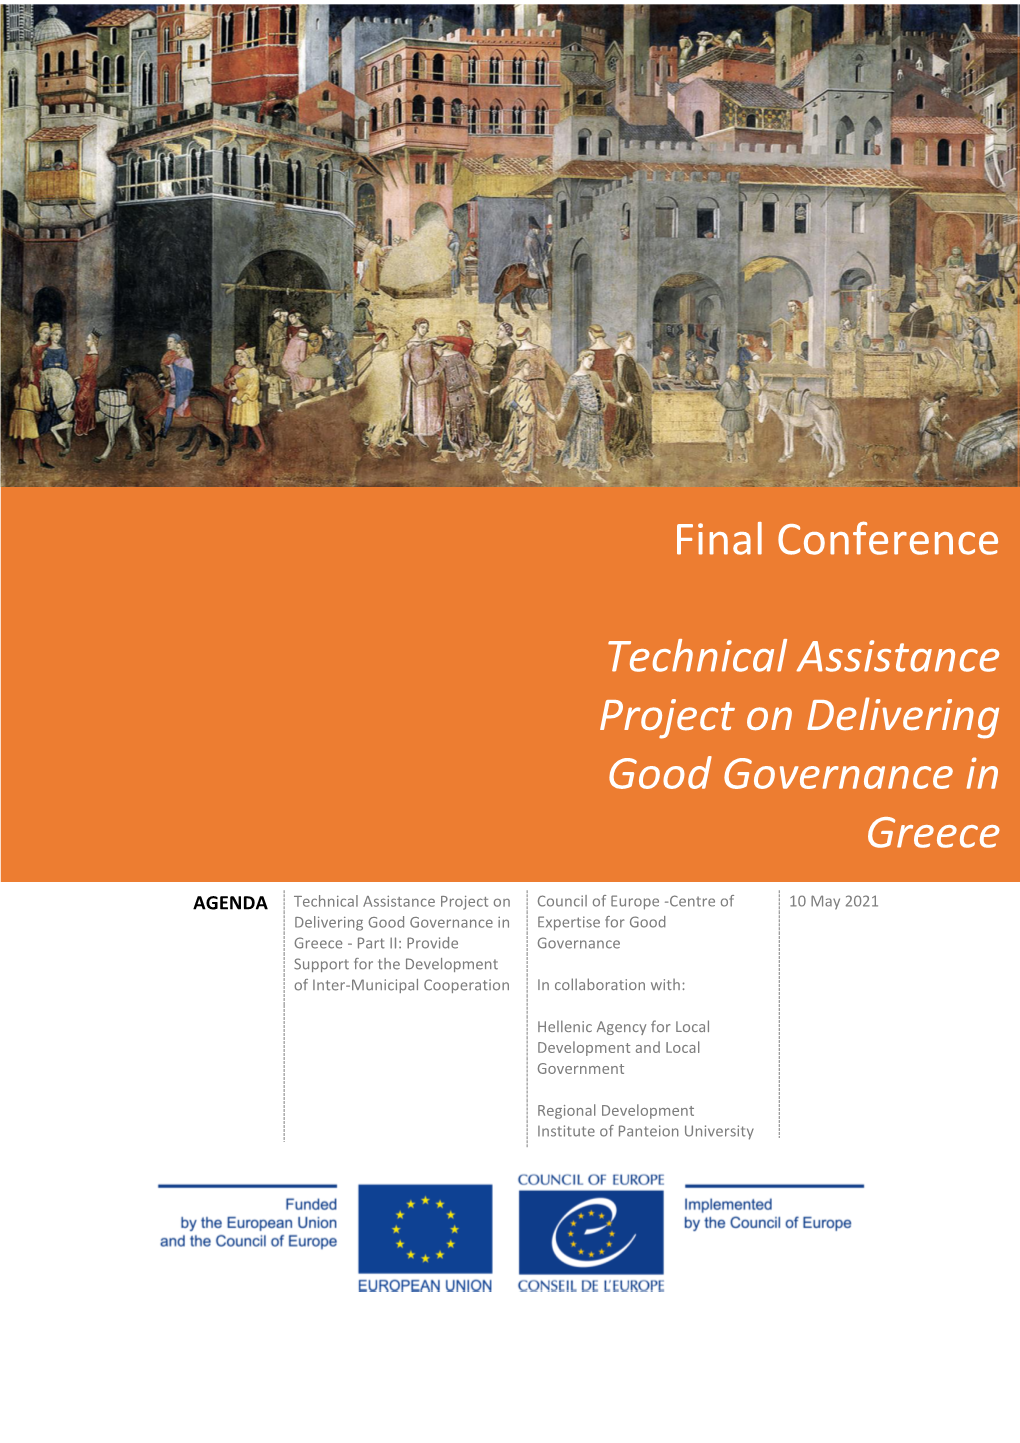 Final Conference Technical Assistance Project on Delivering